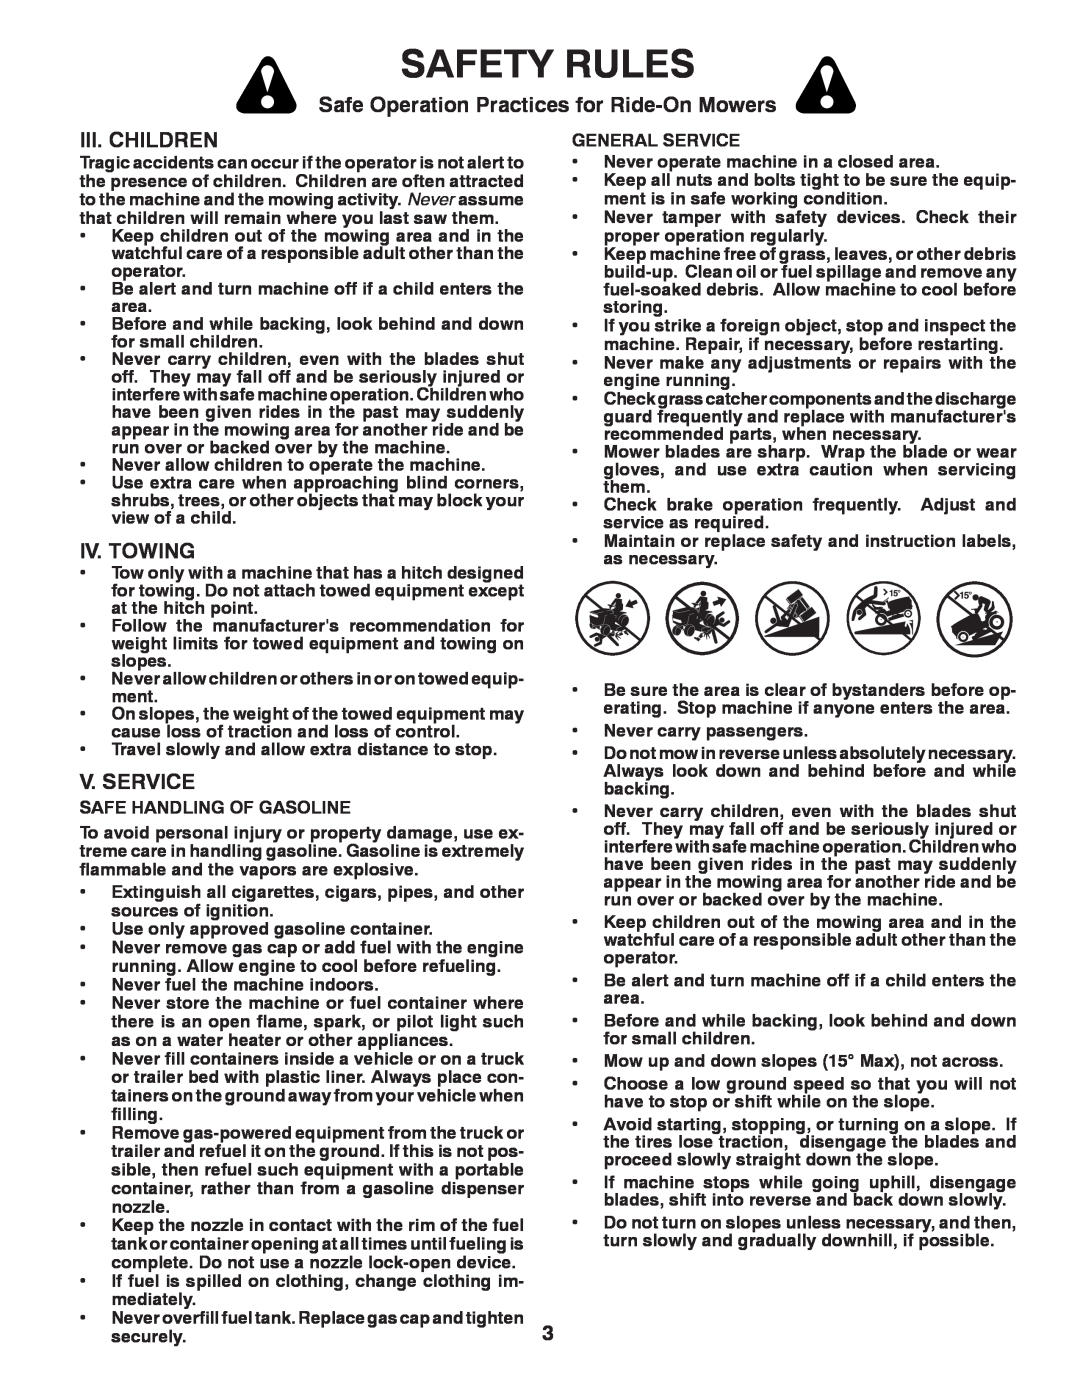 Poulan PB22H54BF manual Iii. Children, Iv. Towing, V. Service, Safety Rules, Safe Operation Practices for Ride-On Mowers 